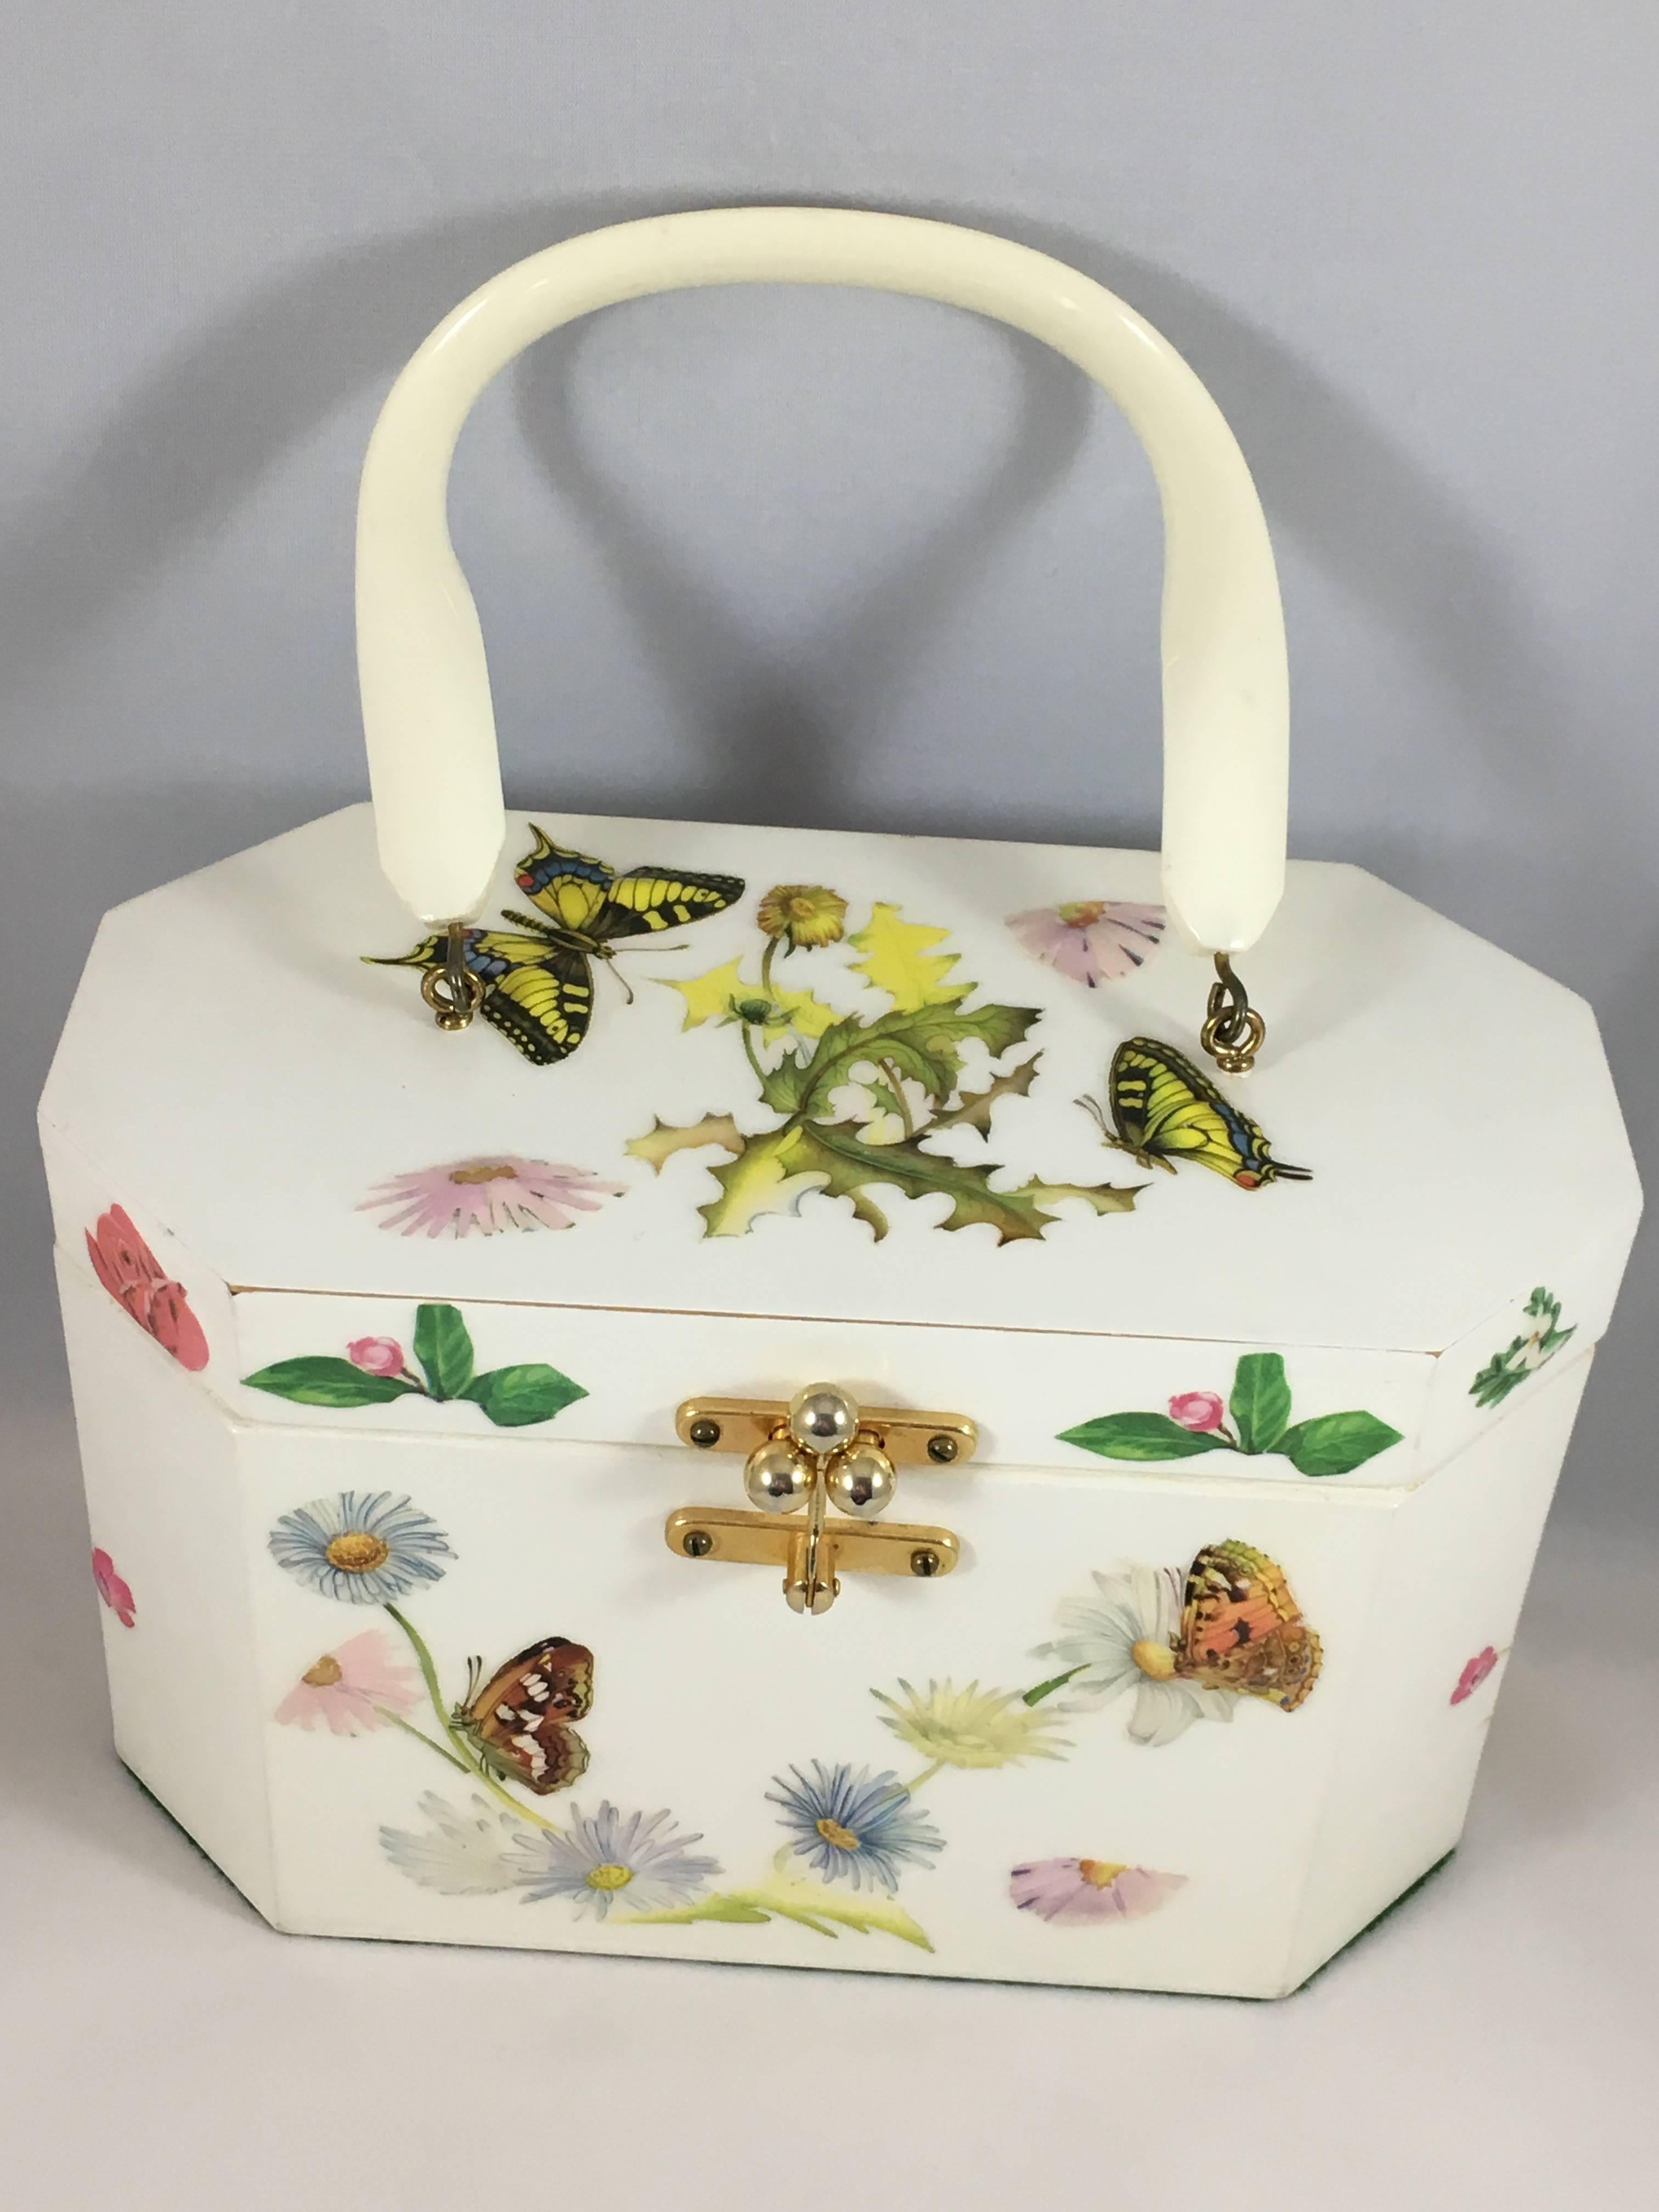 This is a fabulous 1970s Annie Laurie Originals of Palm Beach butterfly decoupaged purse. It is a wooden box handbag with an off white background decorated with puffy decoupaged butterflies and flowers. It fastens at the front with Annie Laurie's